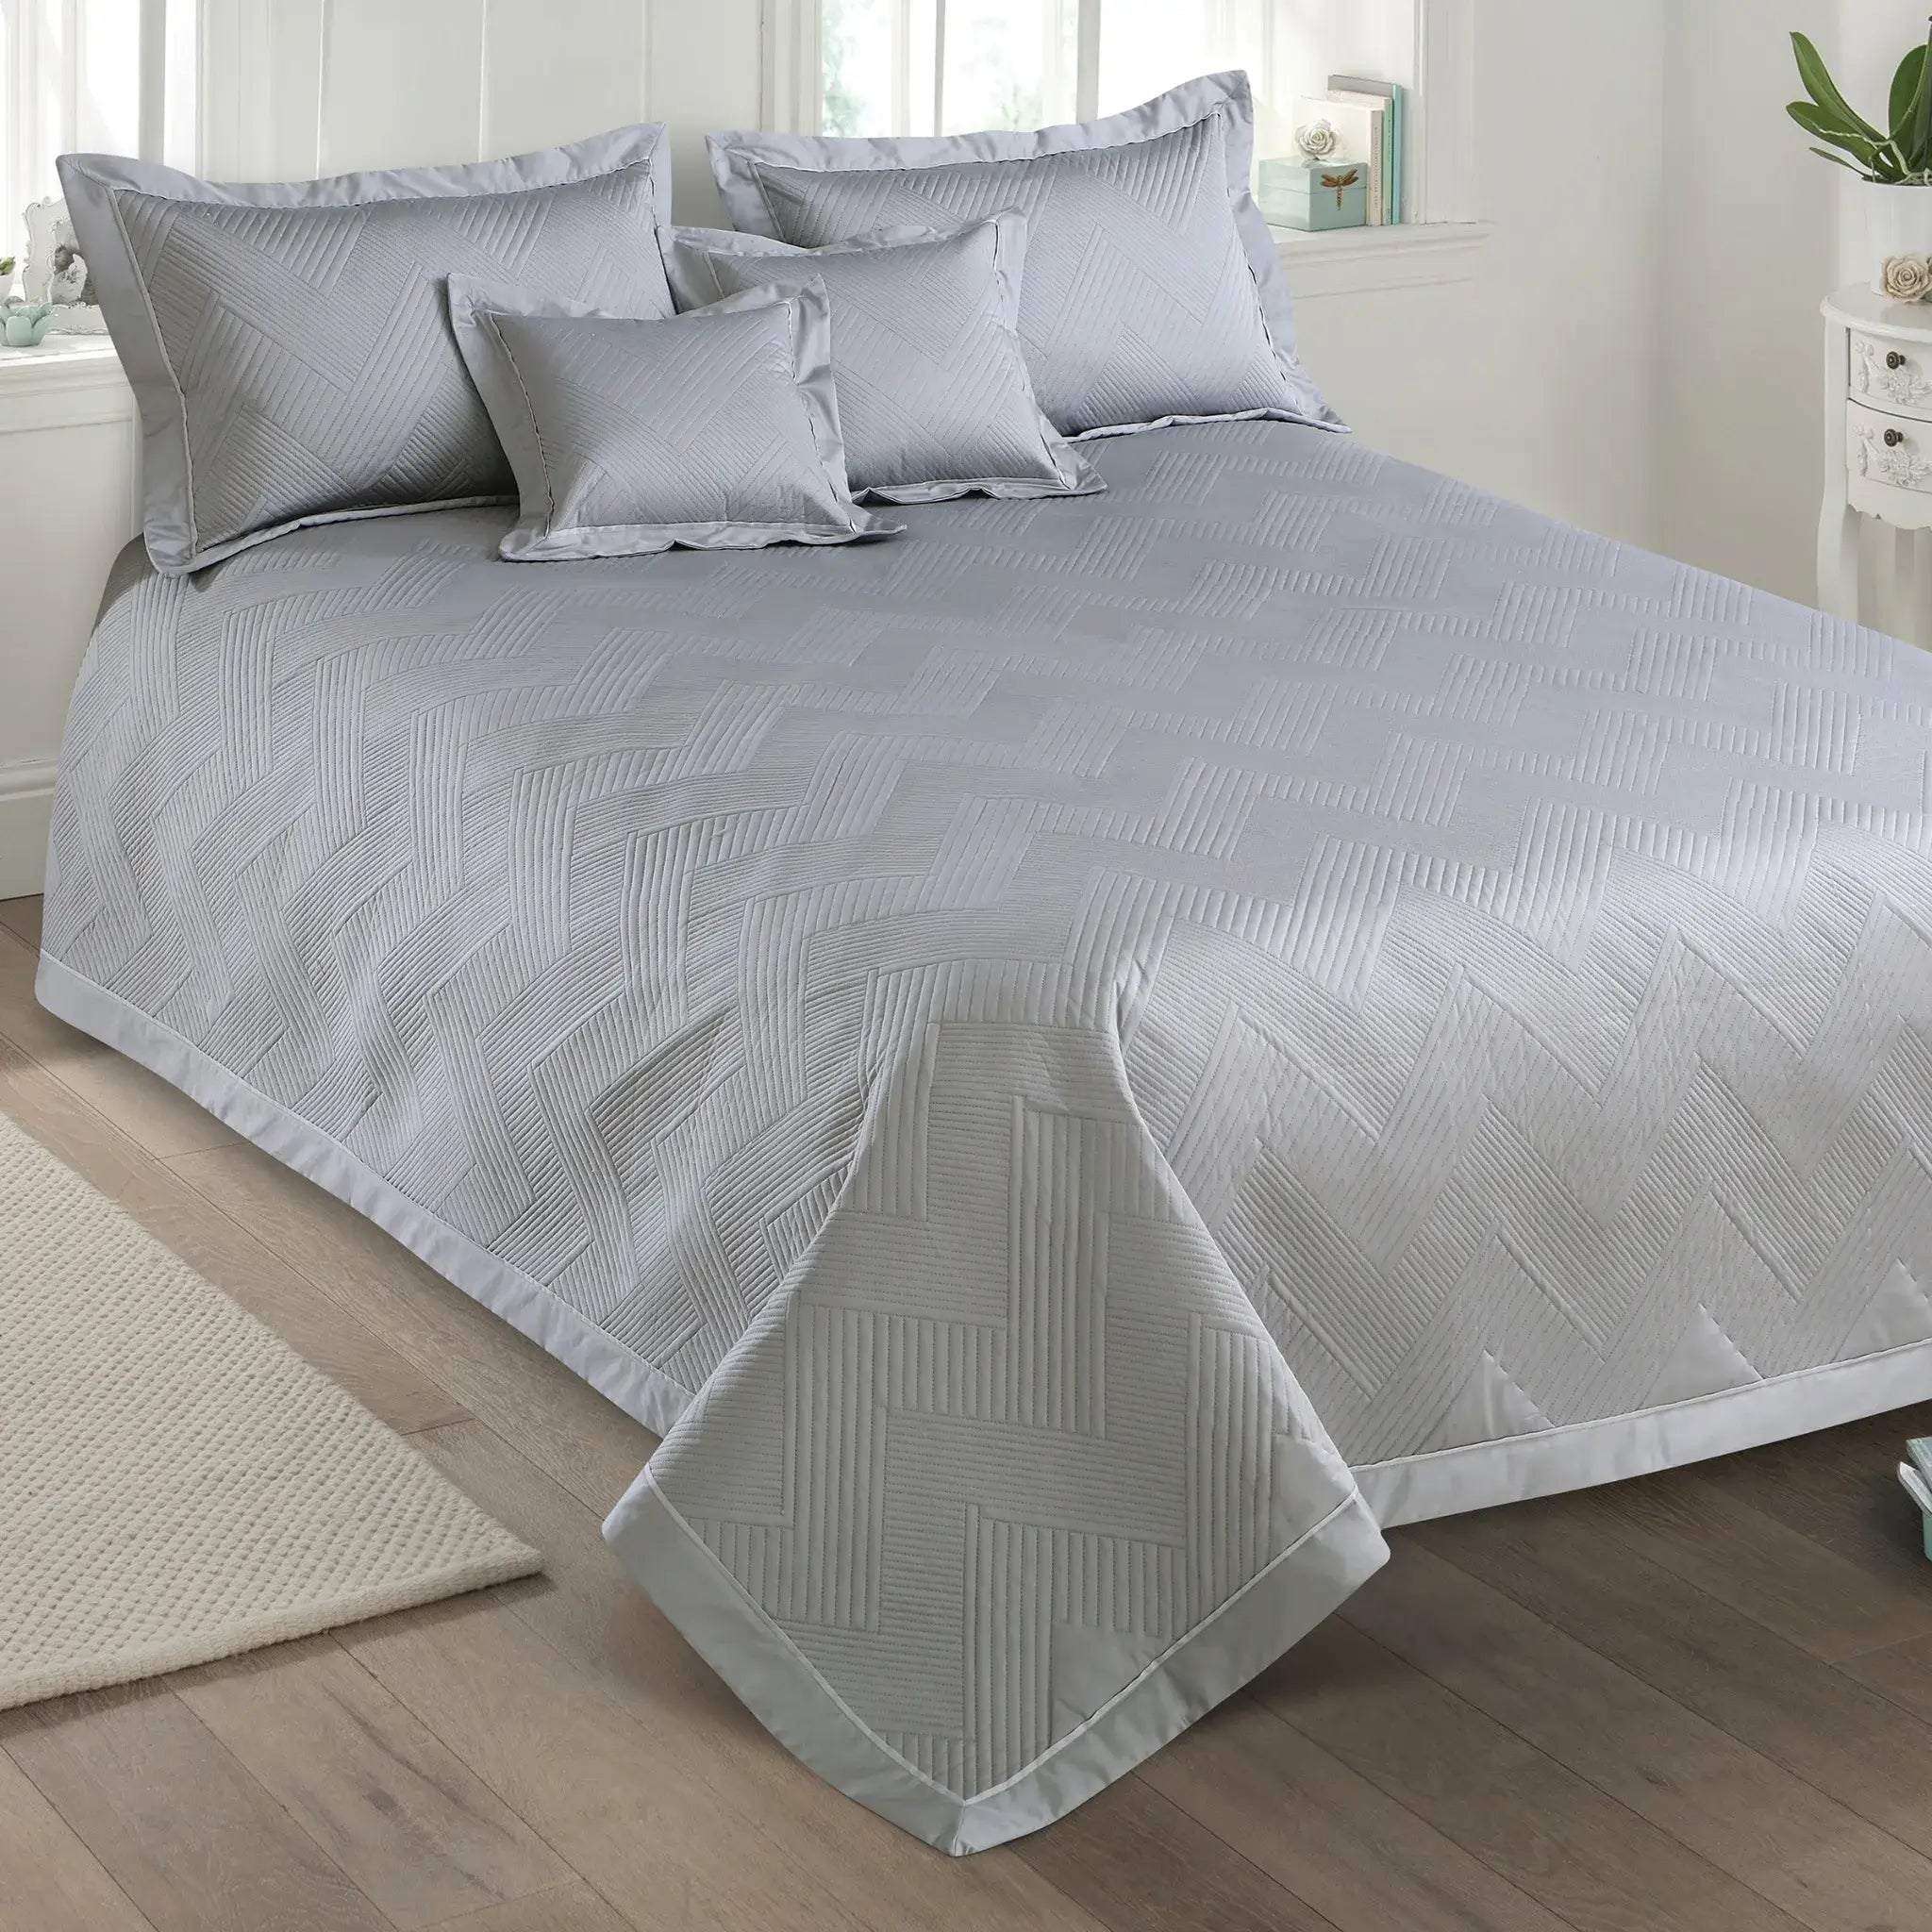 Malako Kairo 500 TC Pearl River Grey Solid King Size 100% Cotton Quilted Bed Cover Set - MALAKO